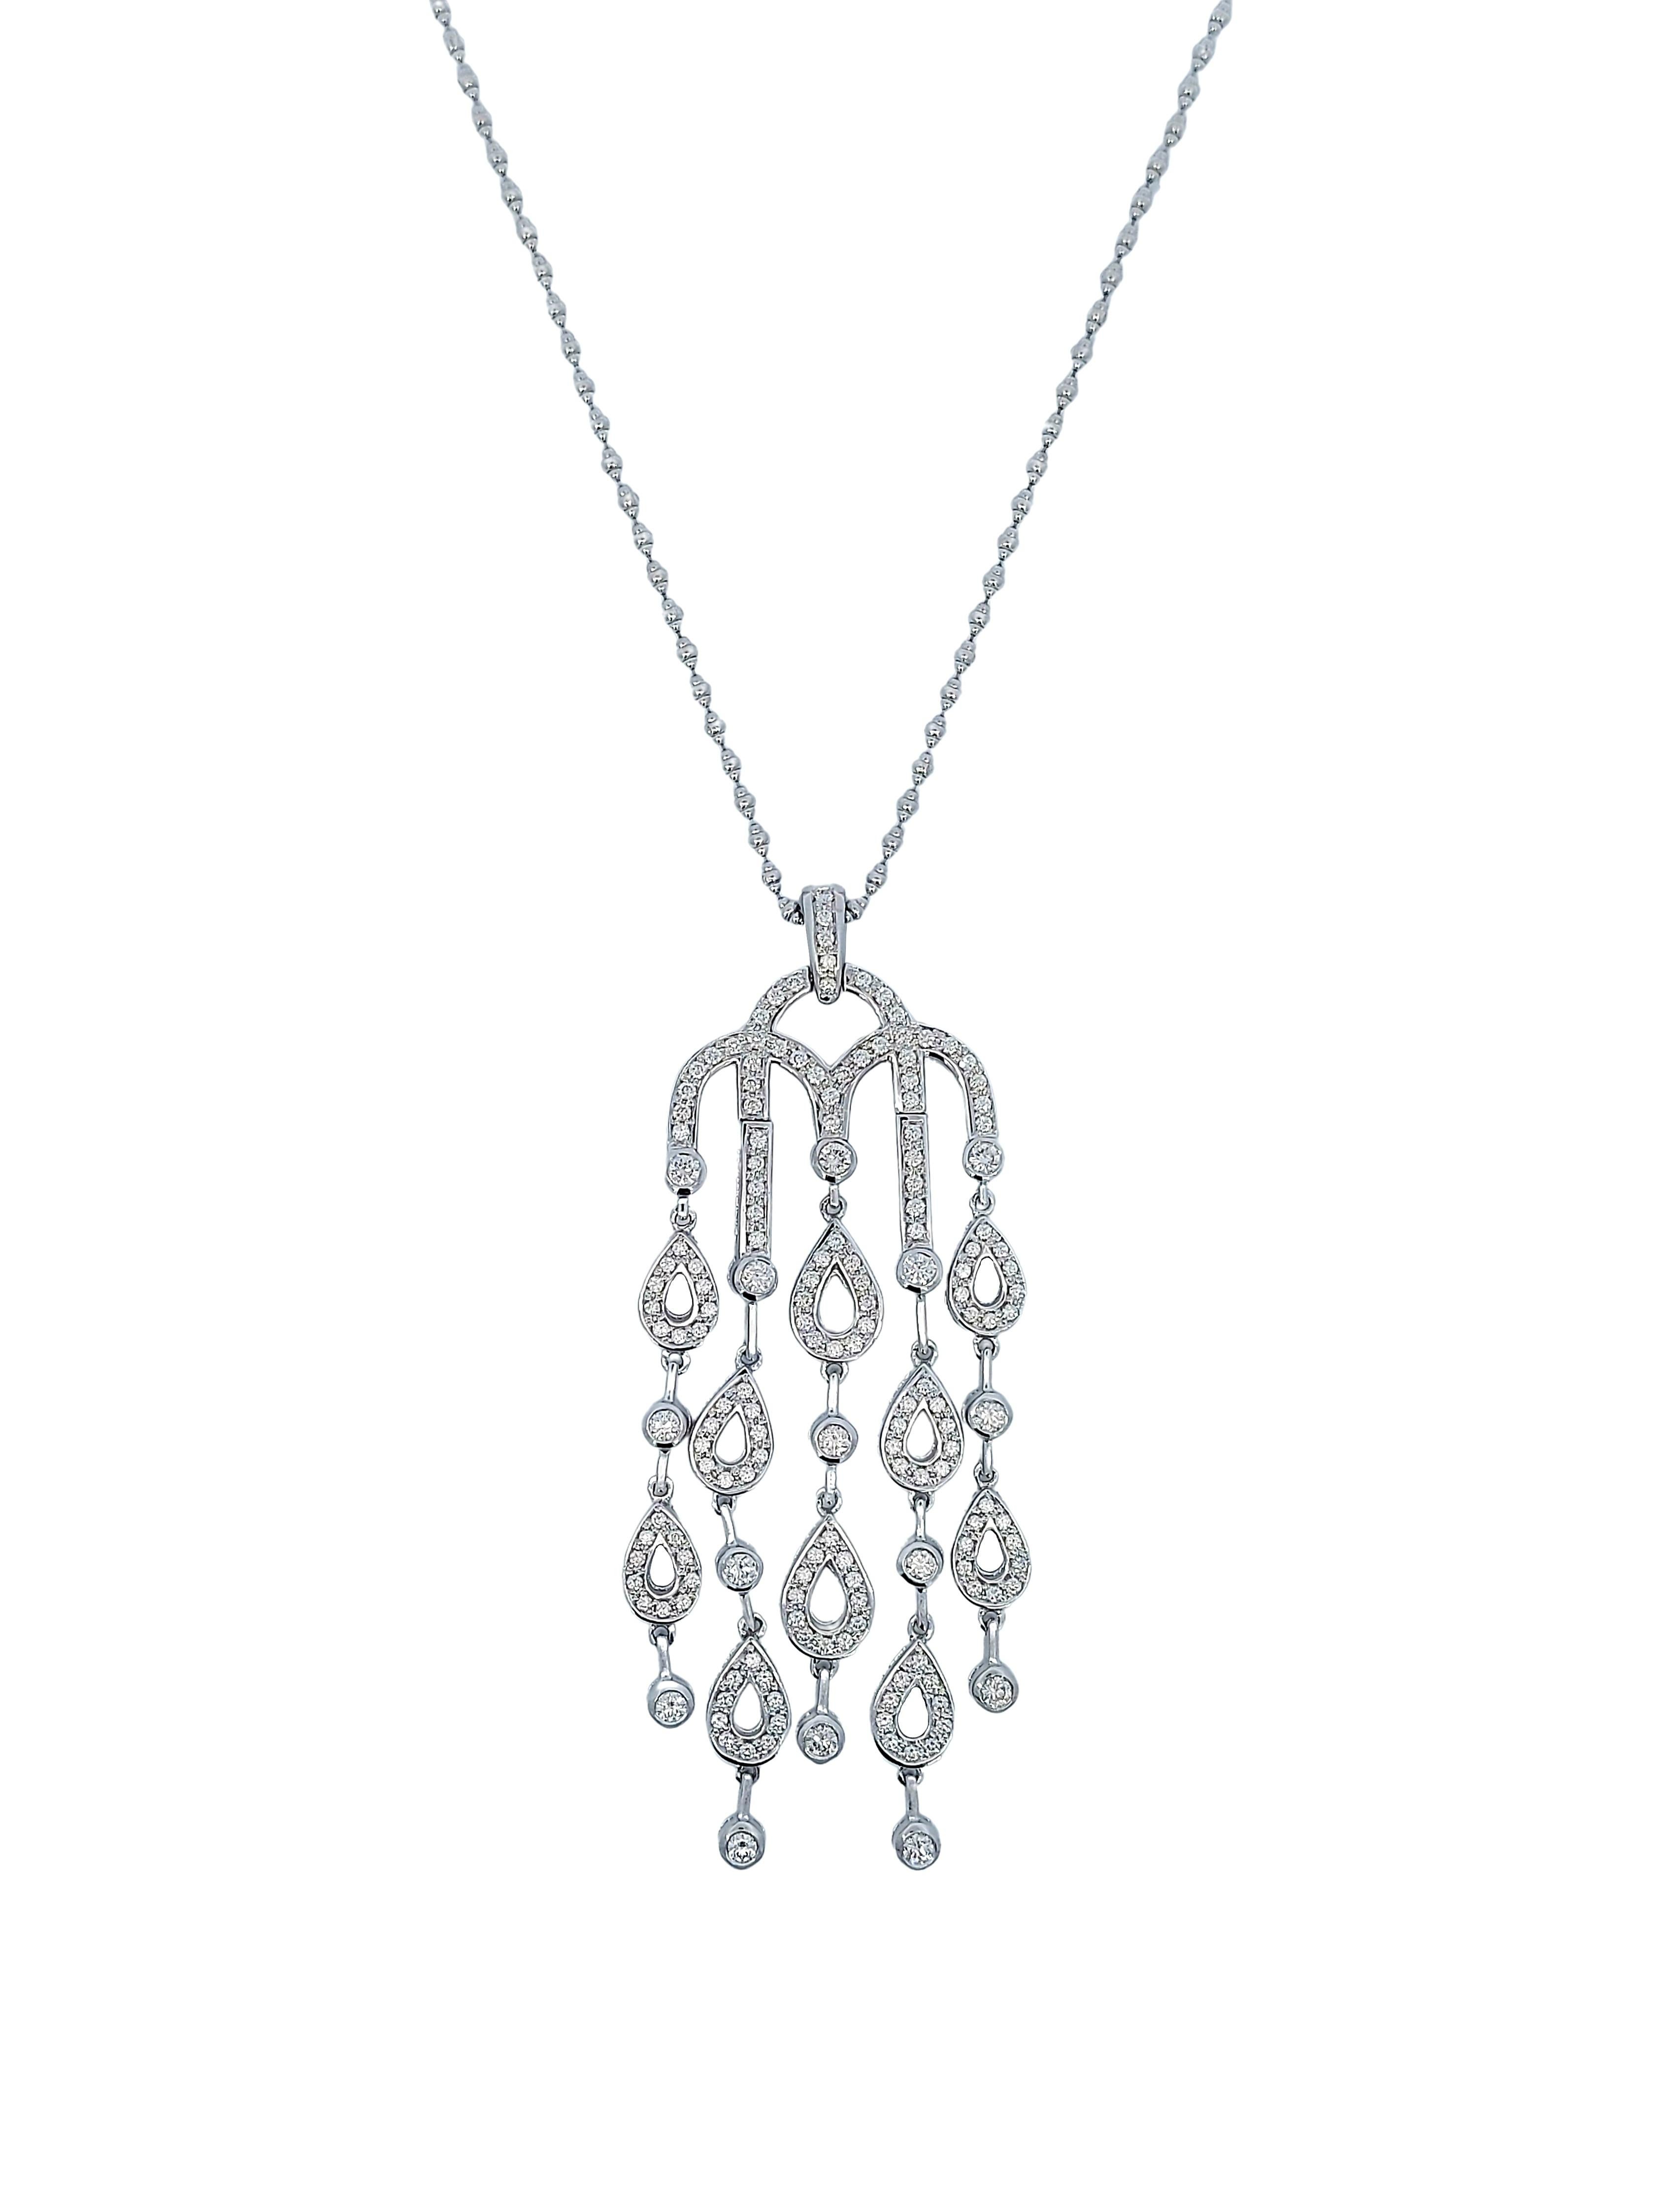 Unique Luxurious Dangling Chandelier 18kt White Gold Necklace With 5.4ct Diamonds

Diamonds: brilliant cut diamonds, together approx. 5.40ct

Material: 18kt white gold

Measurements: 27.5 mm x 80 mm x 2.6 mm
Necklace length 40cm

Total weight: 28.9